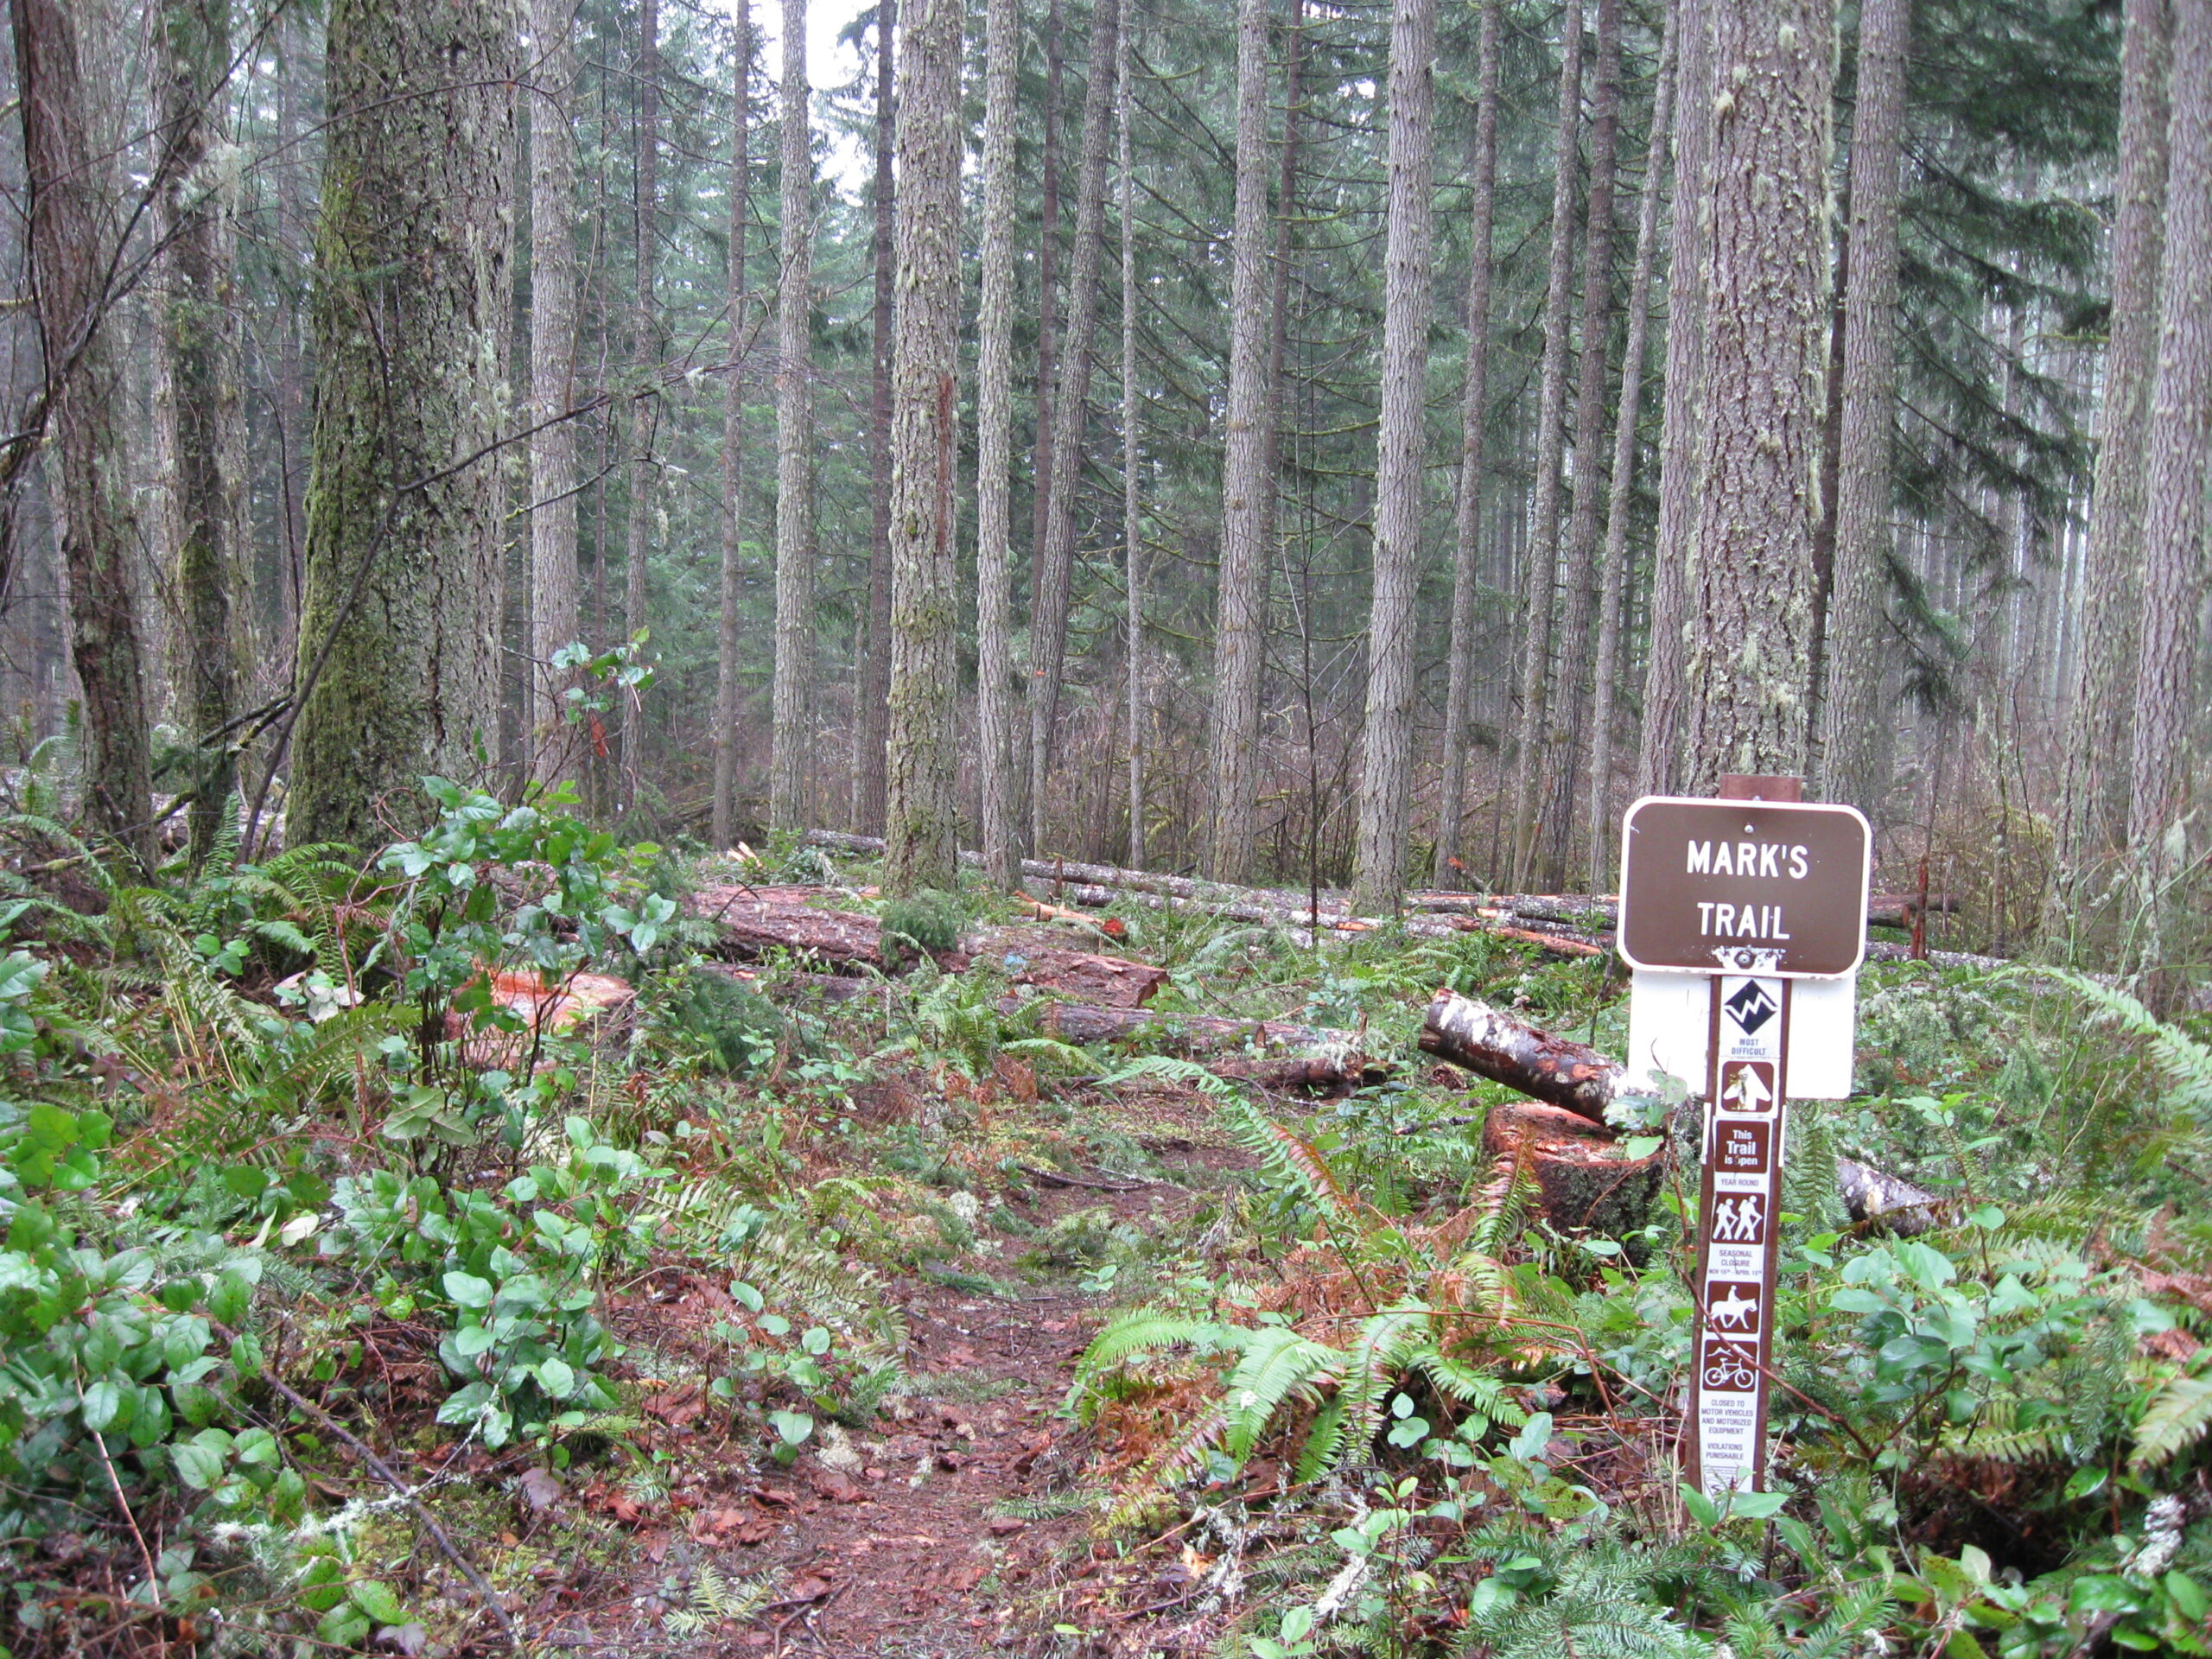 This is a photo of Mark's Trailhead within the Annie's Thinning Timber Sale.